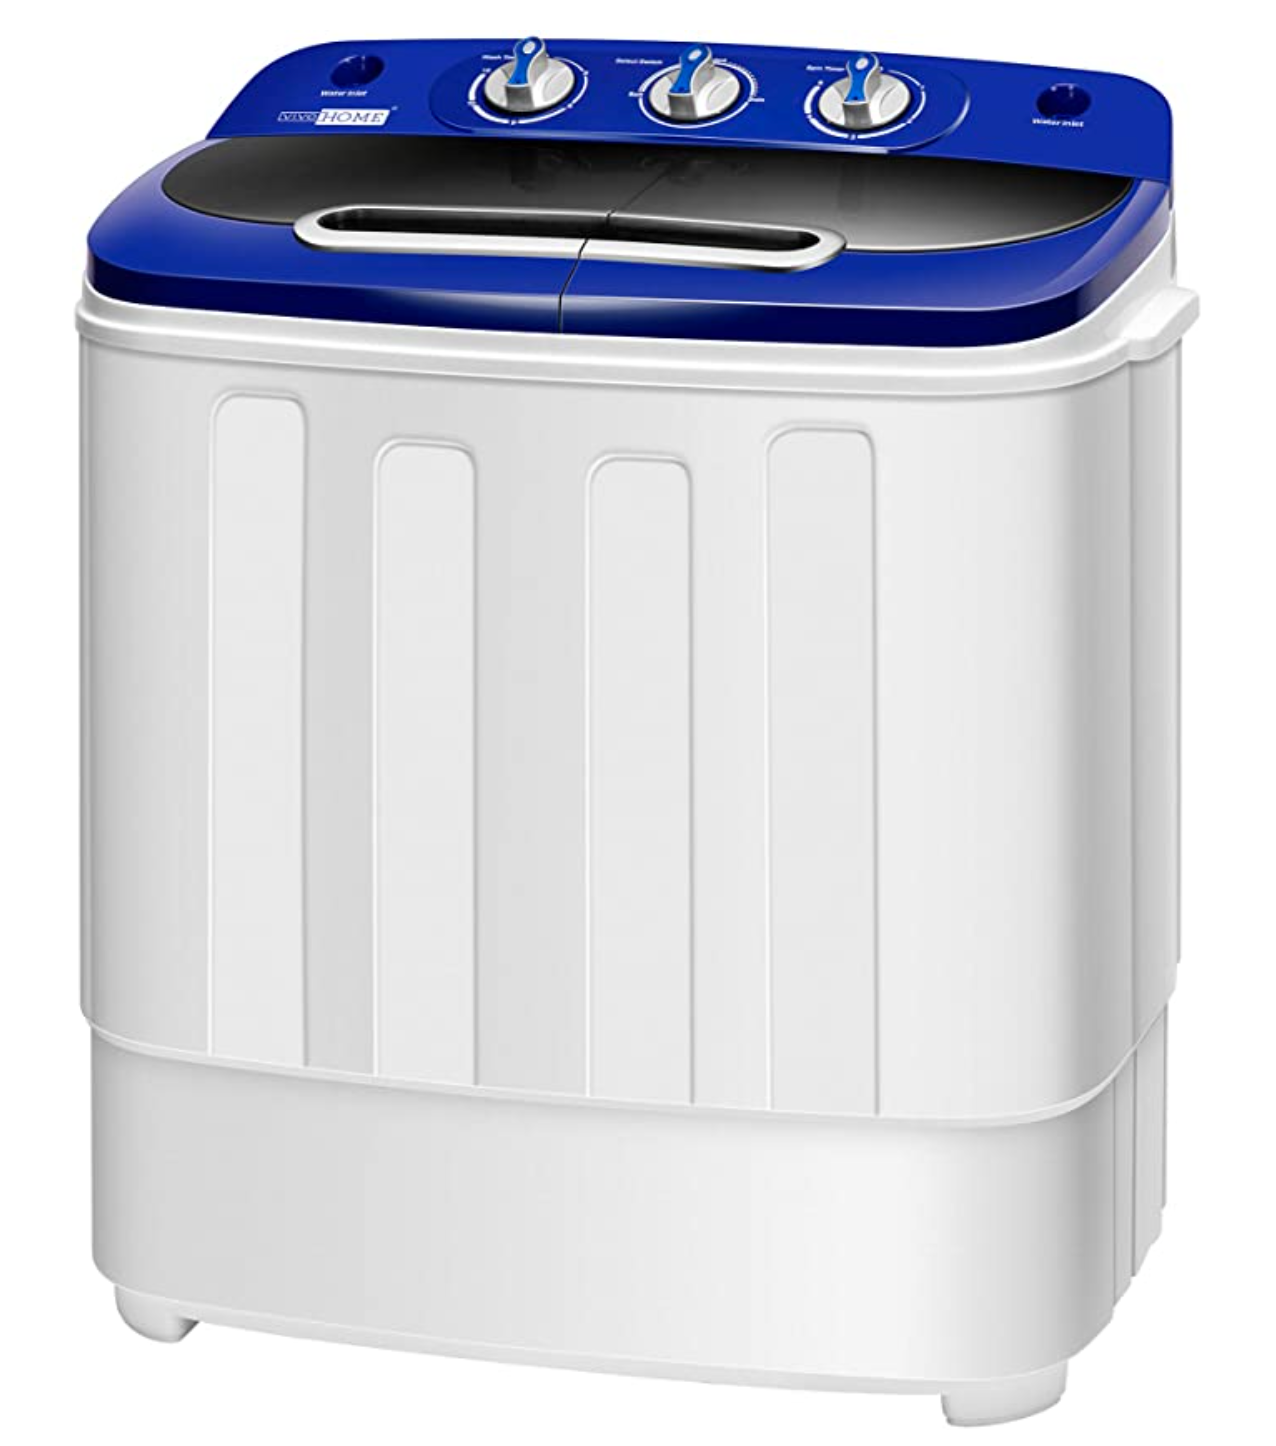 Portable washer for rv